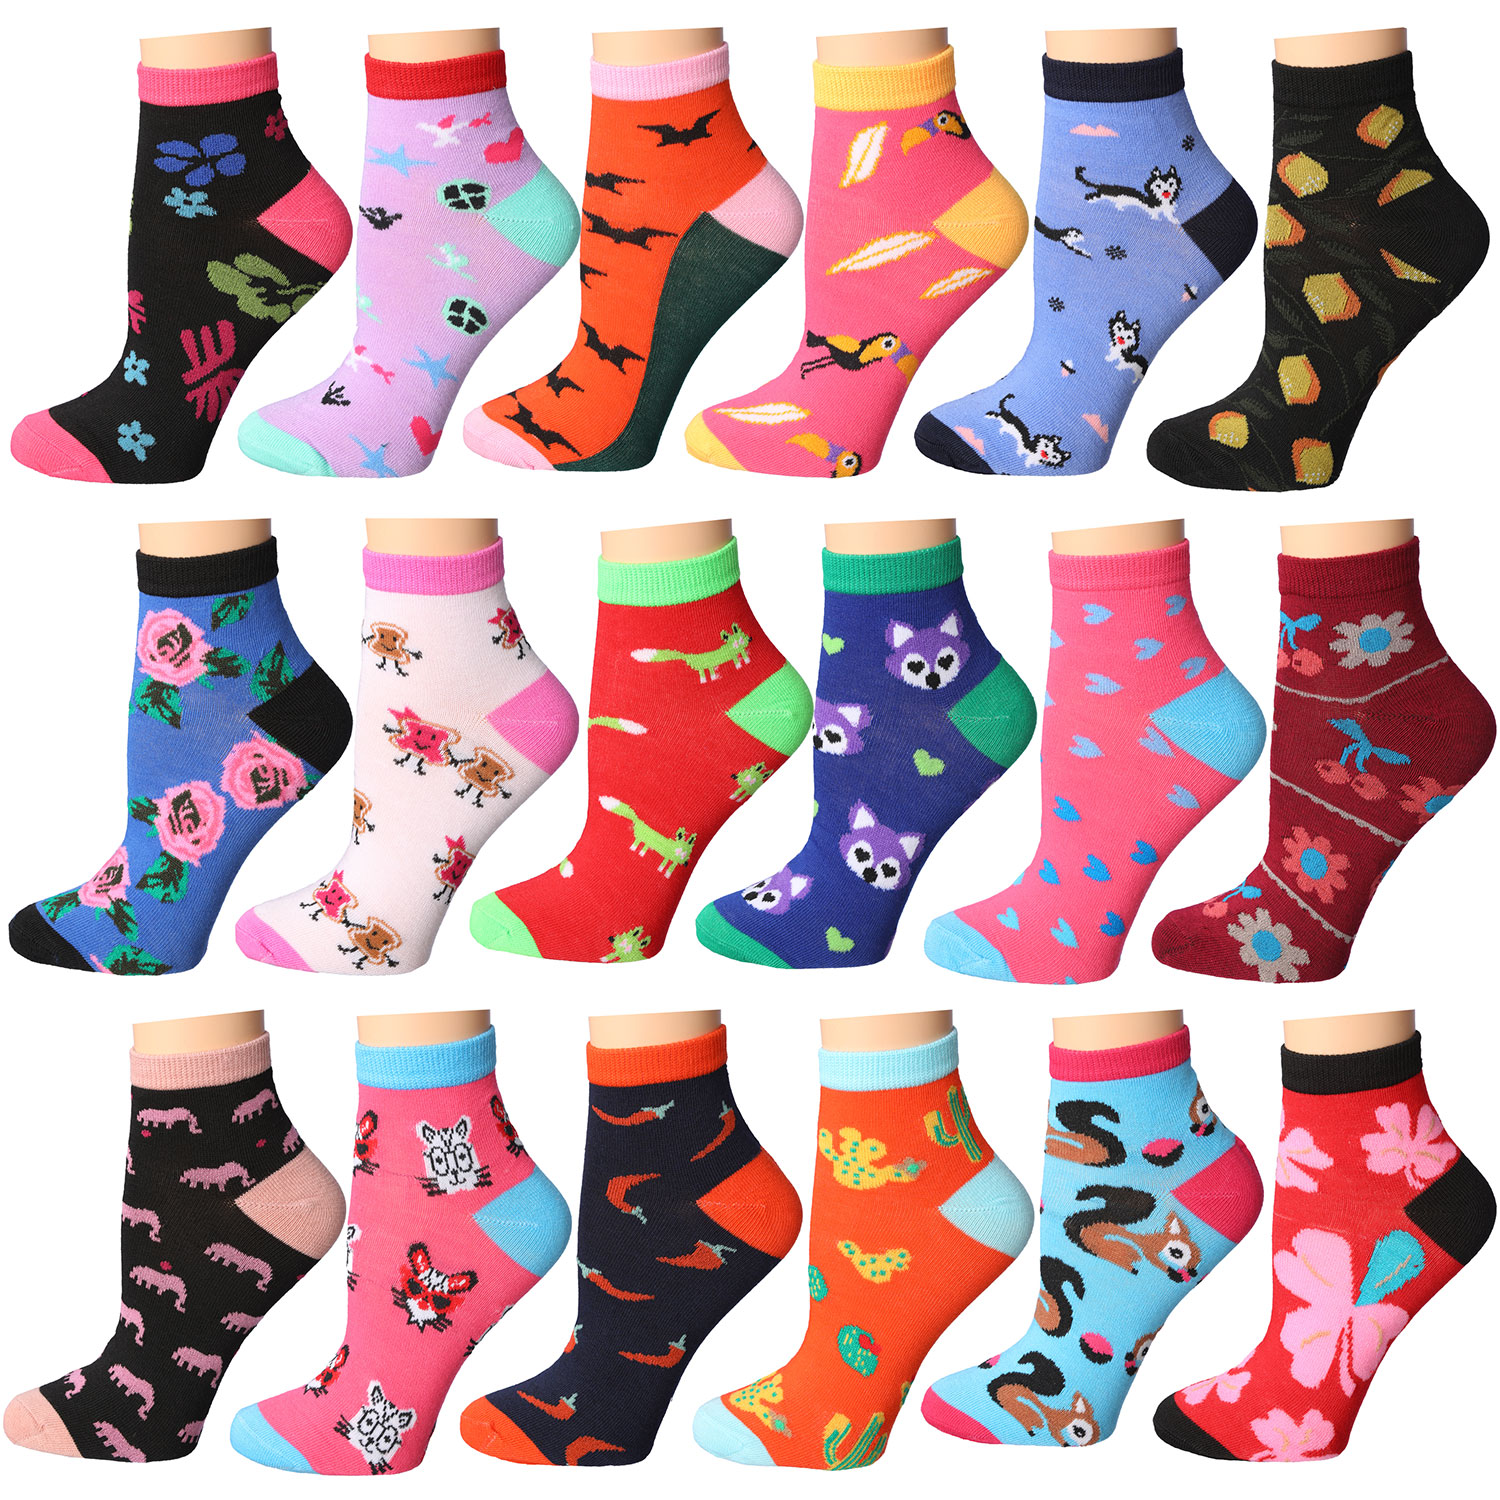 18 Pairs Frenchic Women's Fun Patterned Cotton-Blend Ankle Socks